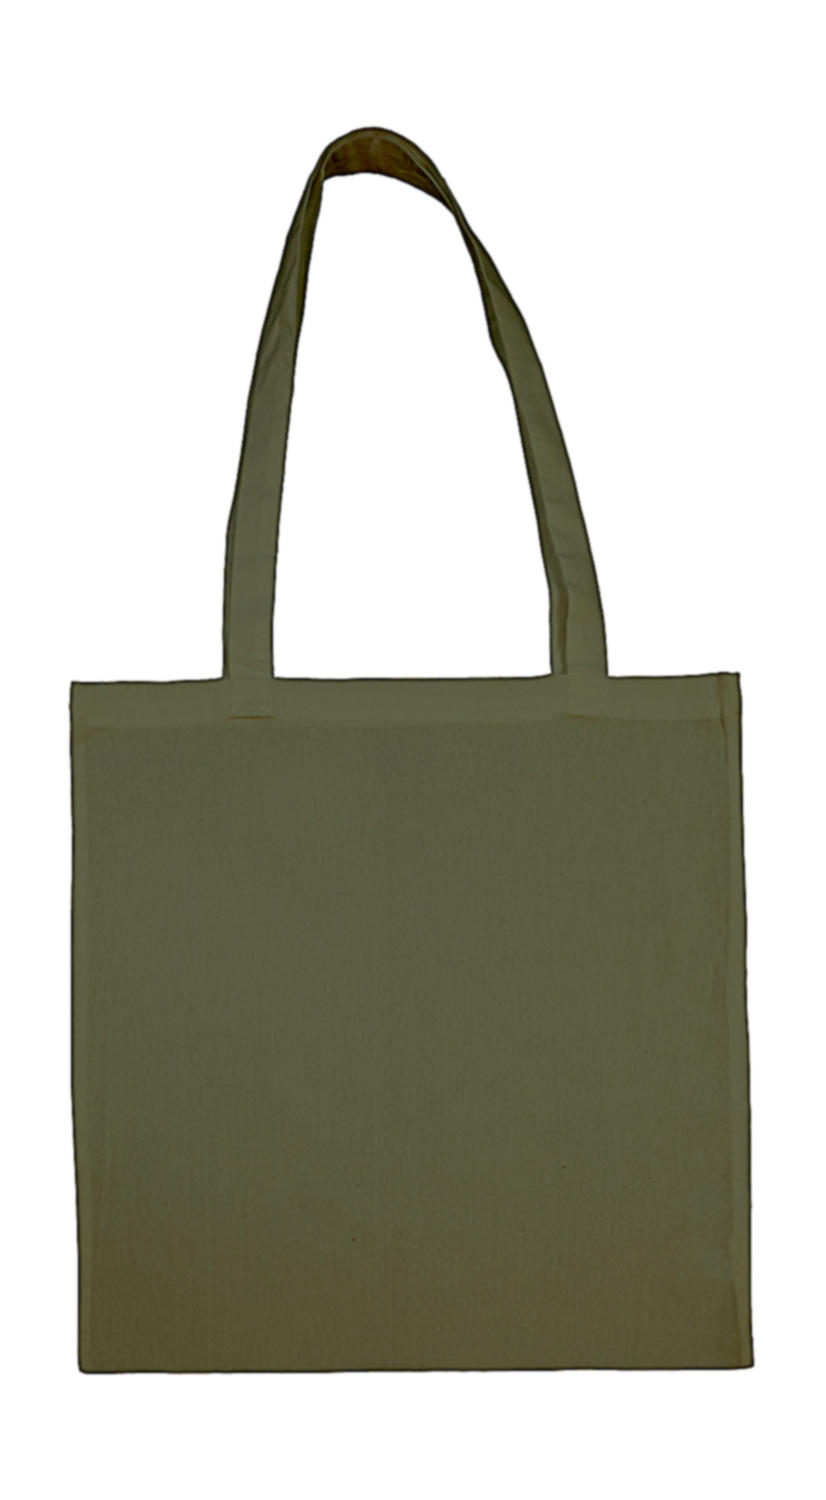  Cotton Bag LH in Farbe Military Green